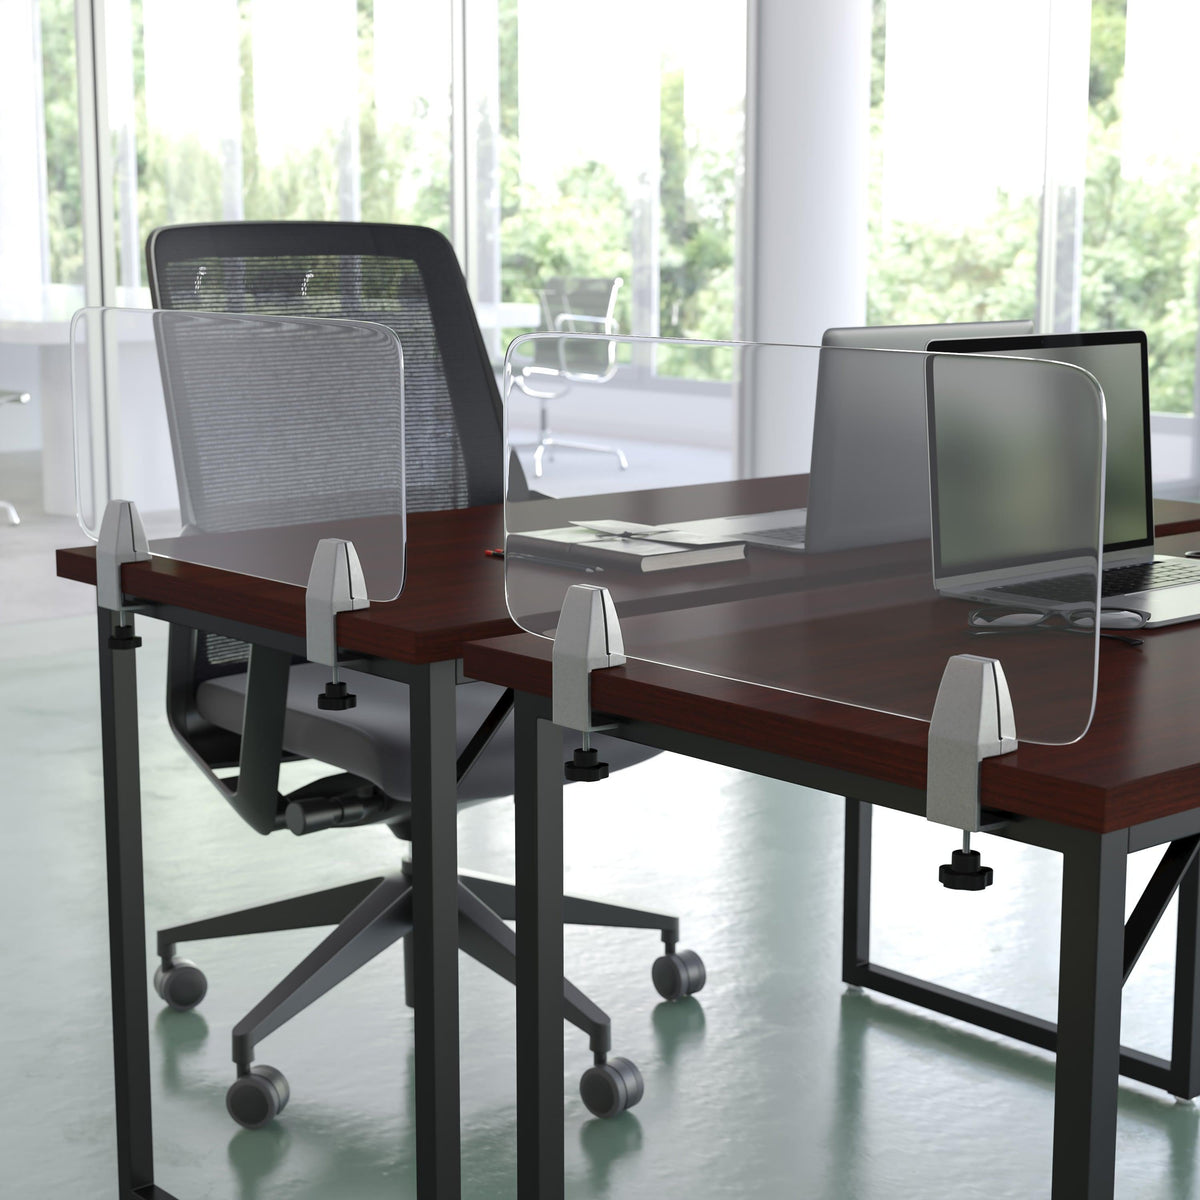 23"L x 12"H |#| Clear Acrylic Desk Partition, 12"H x 23"L (Installation Hardware Included)